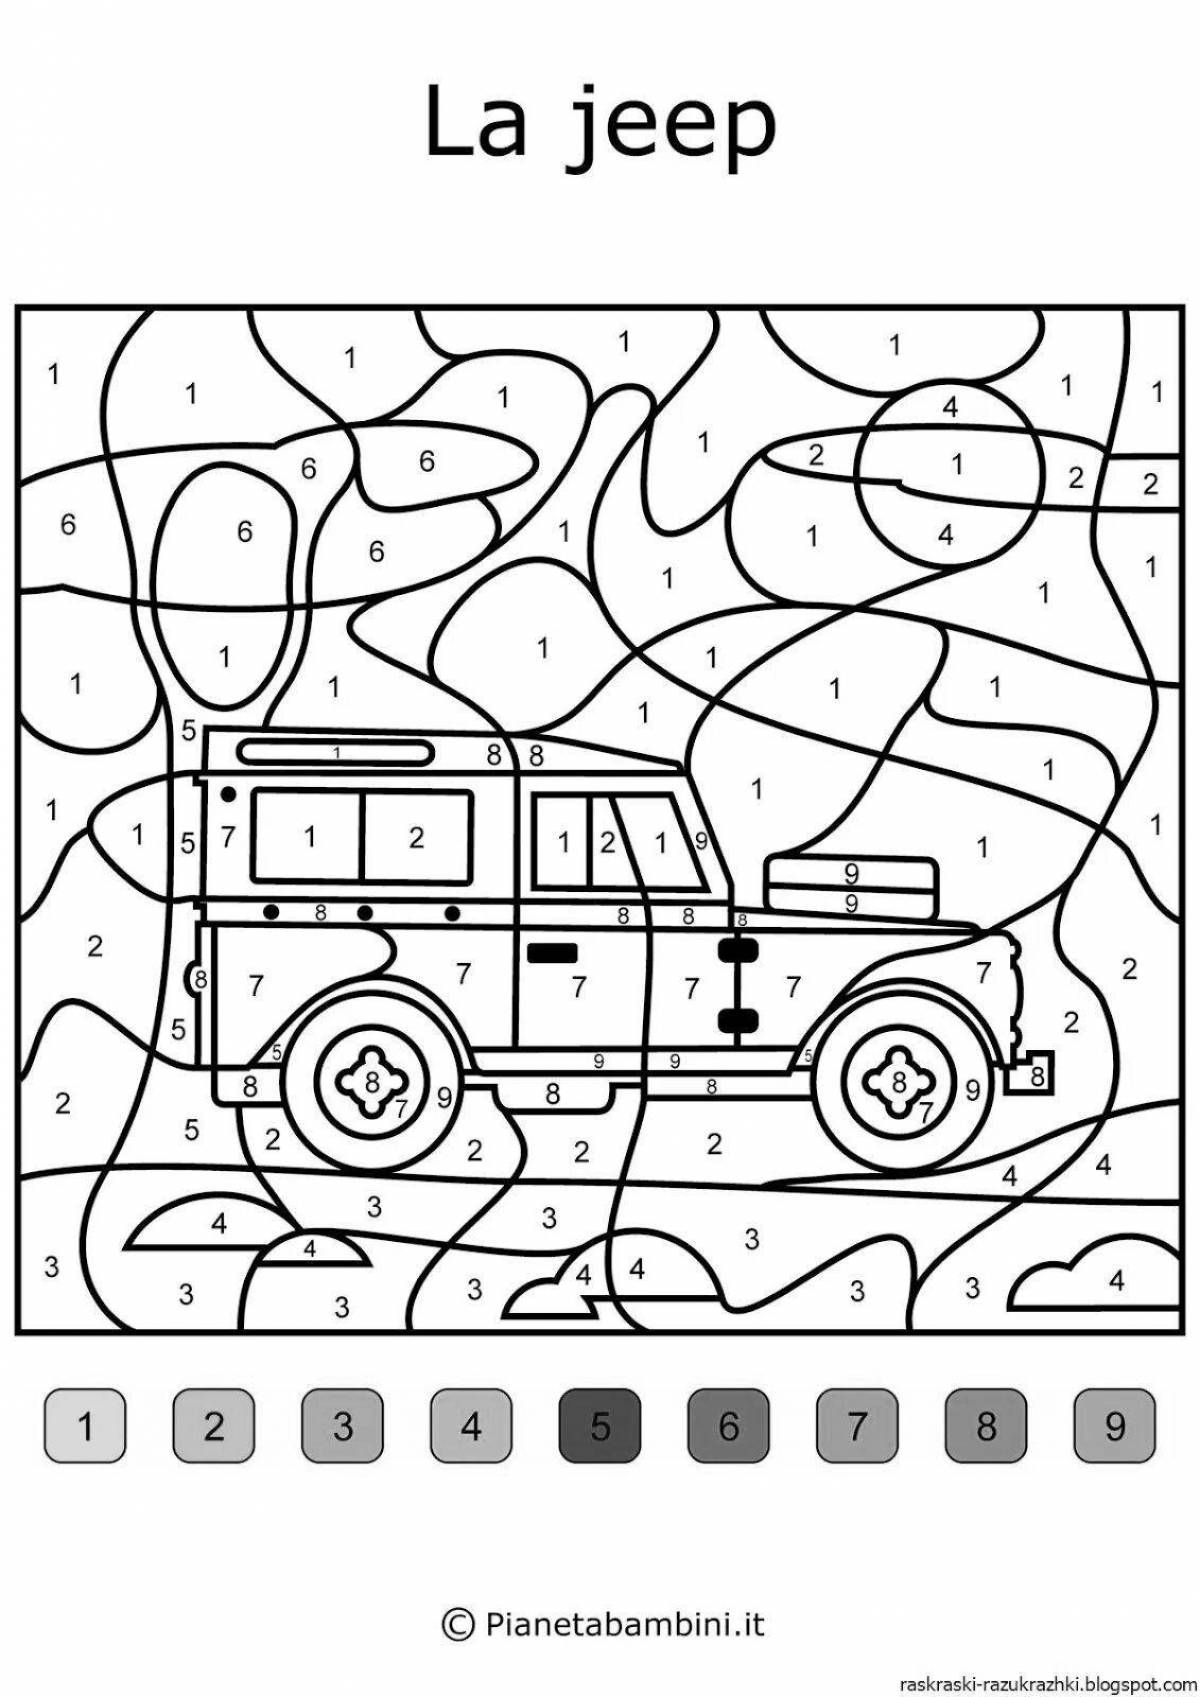 Creative coloring by numbers for 6 year olds